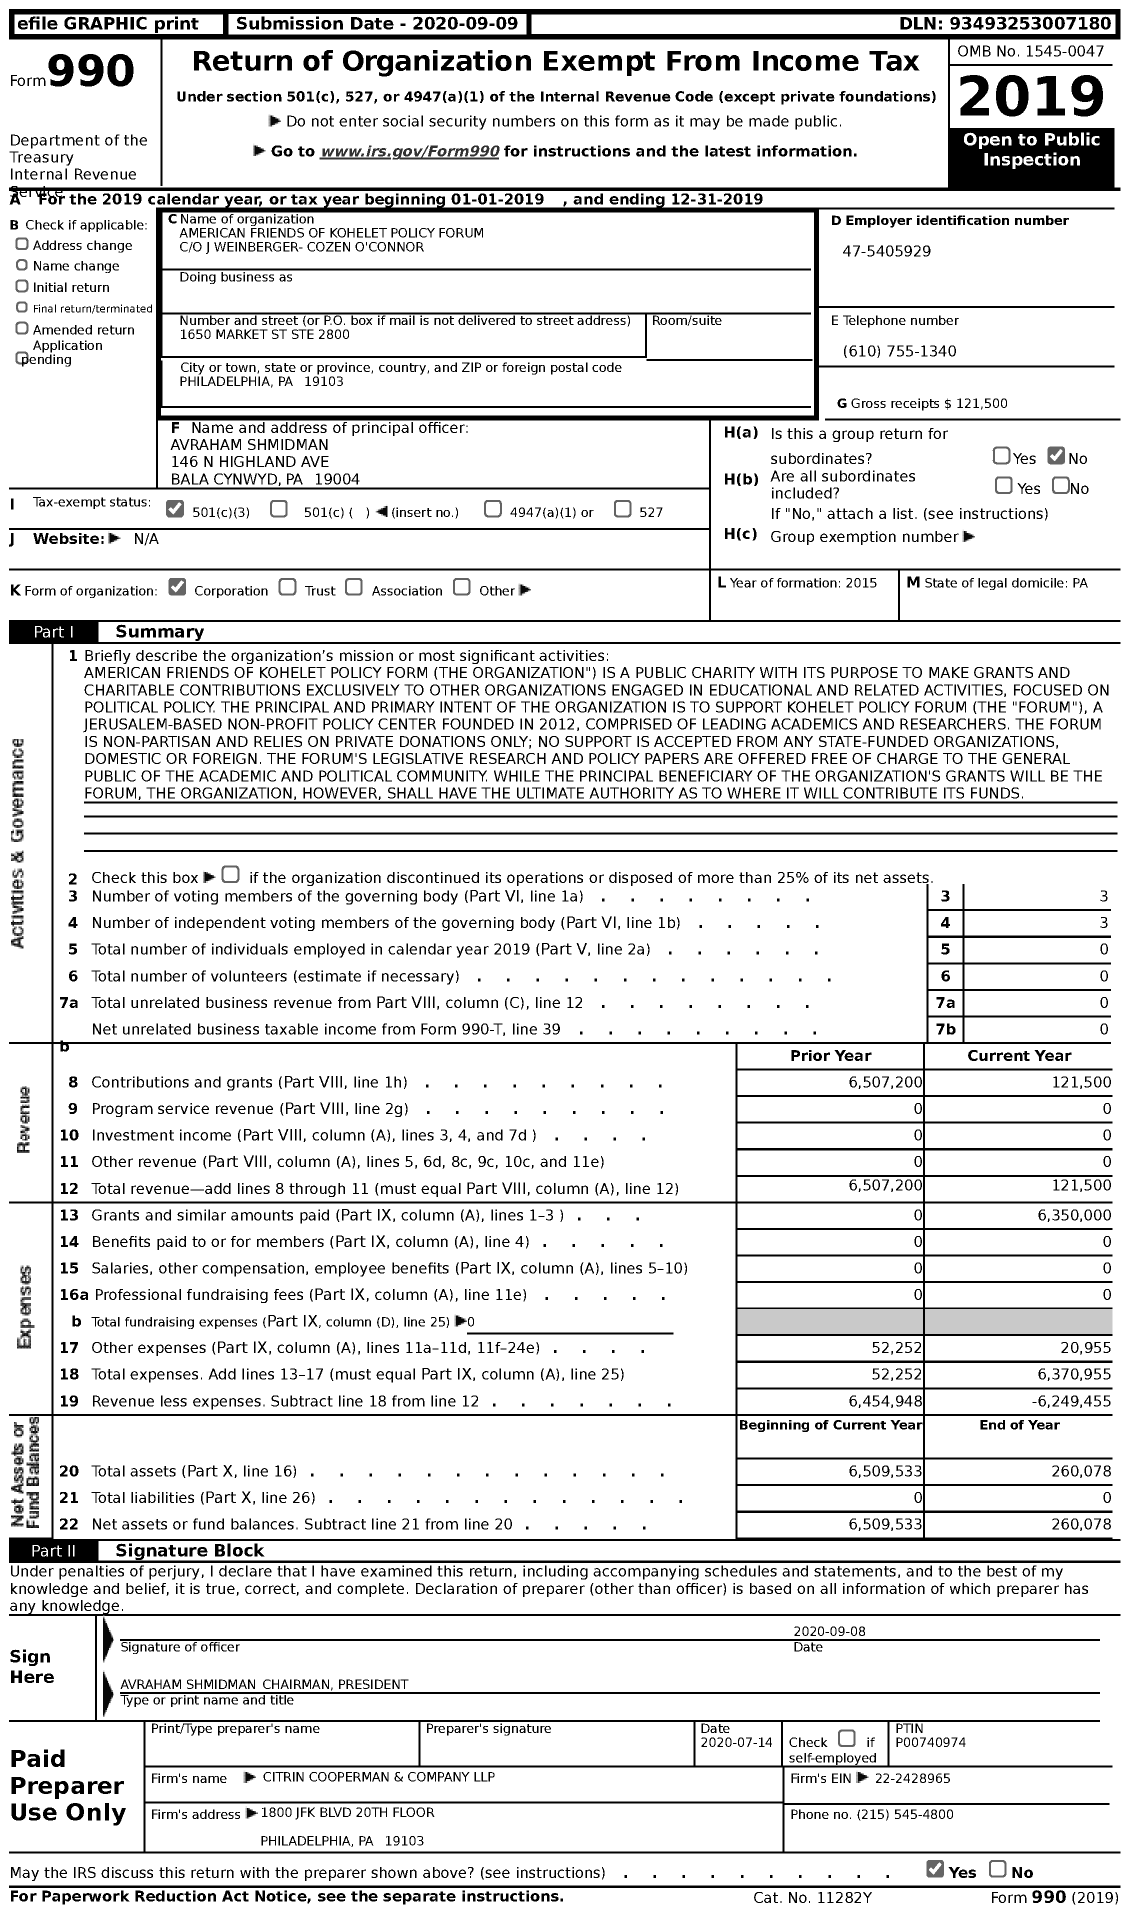 Image of first page of 2019 Form 990 for American Friends of Kohelet Policy Forum